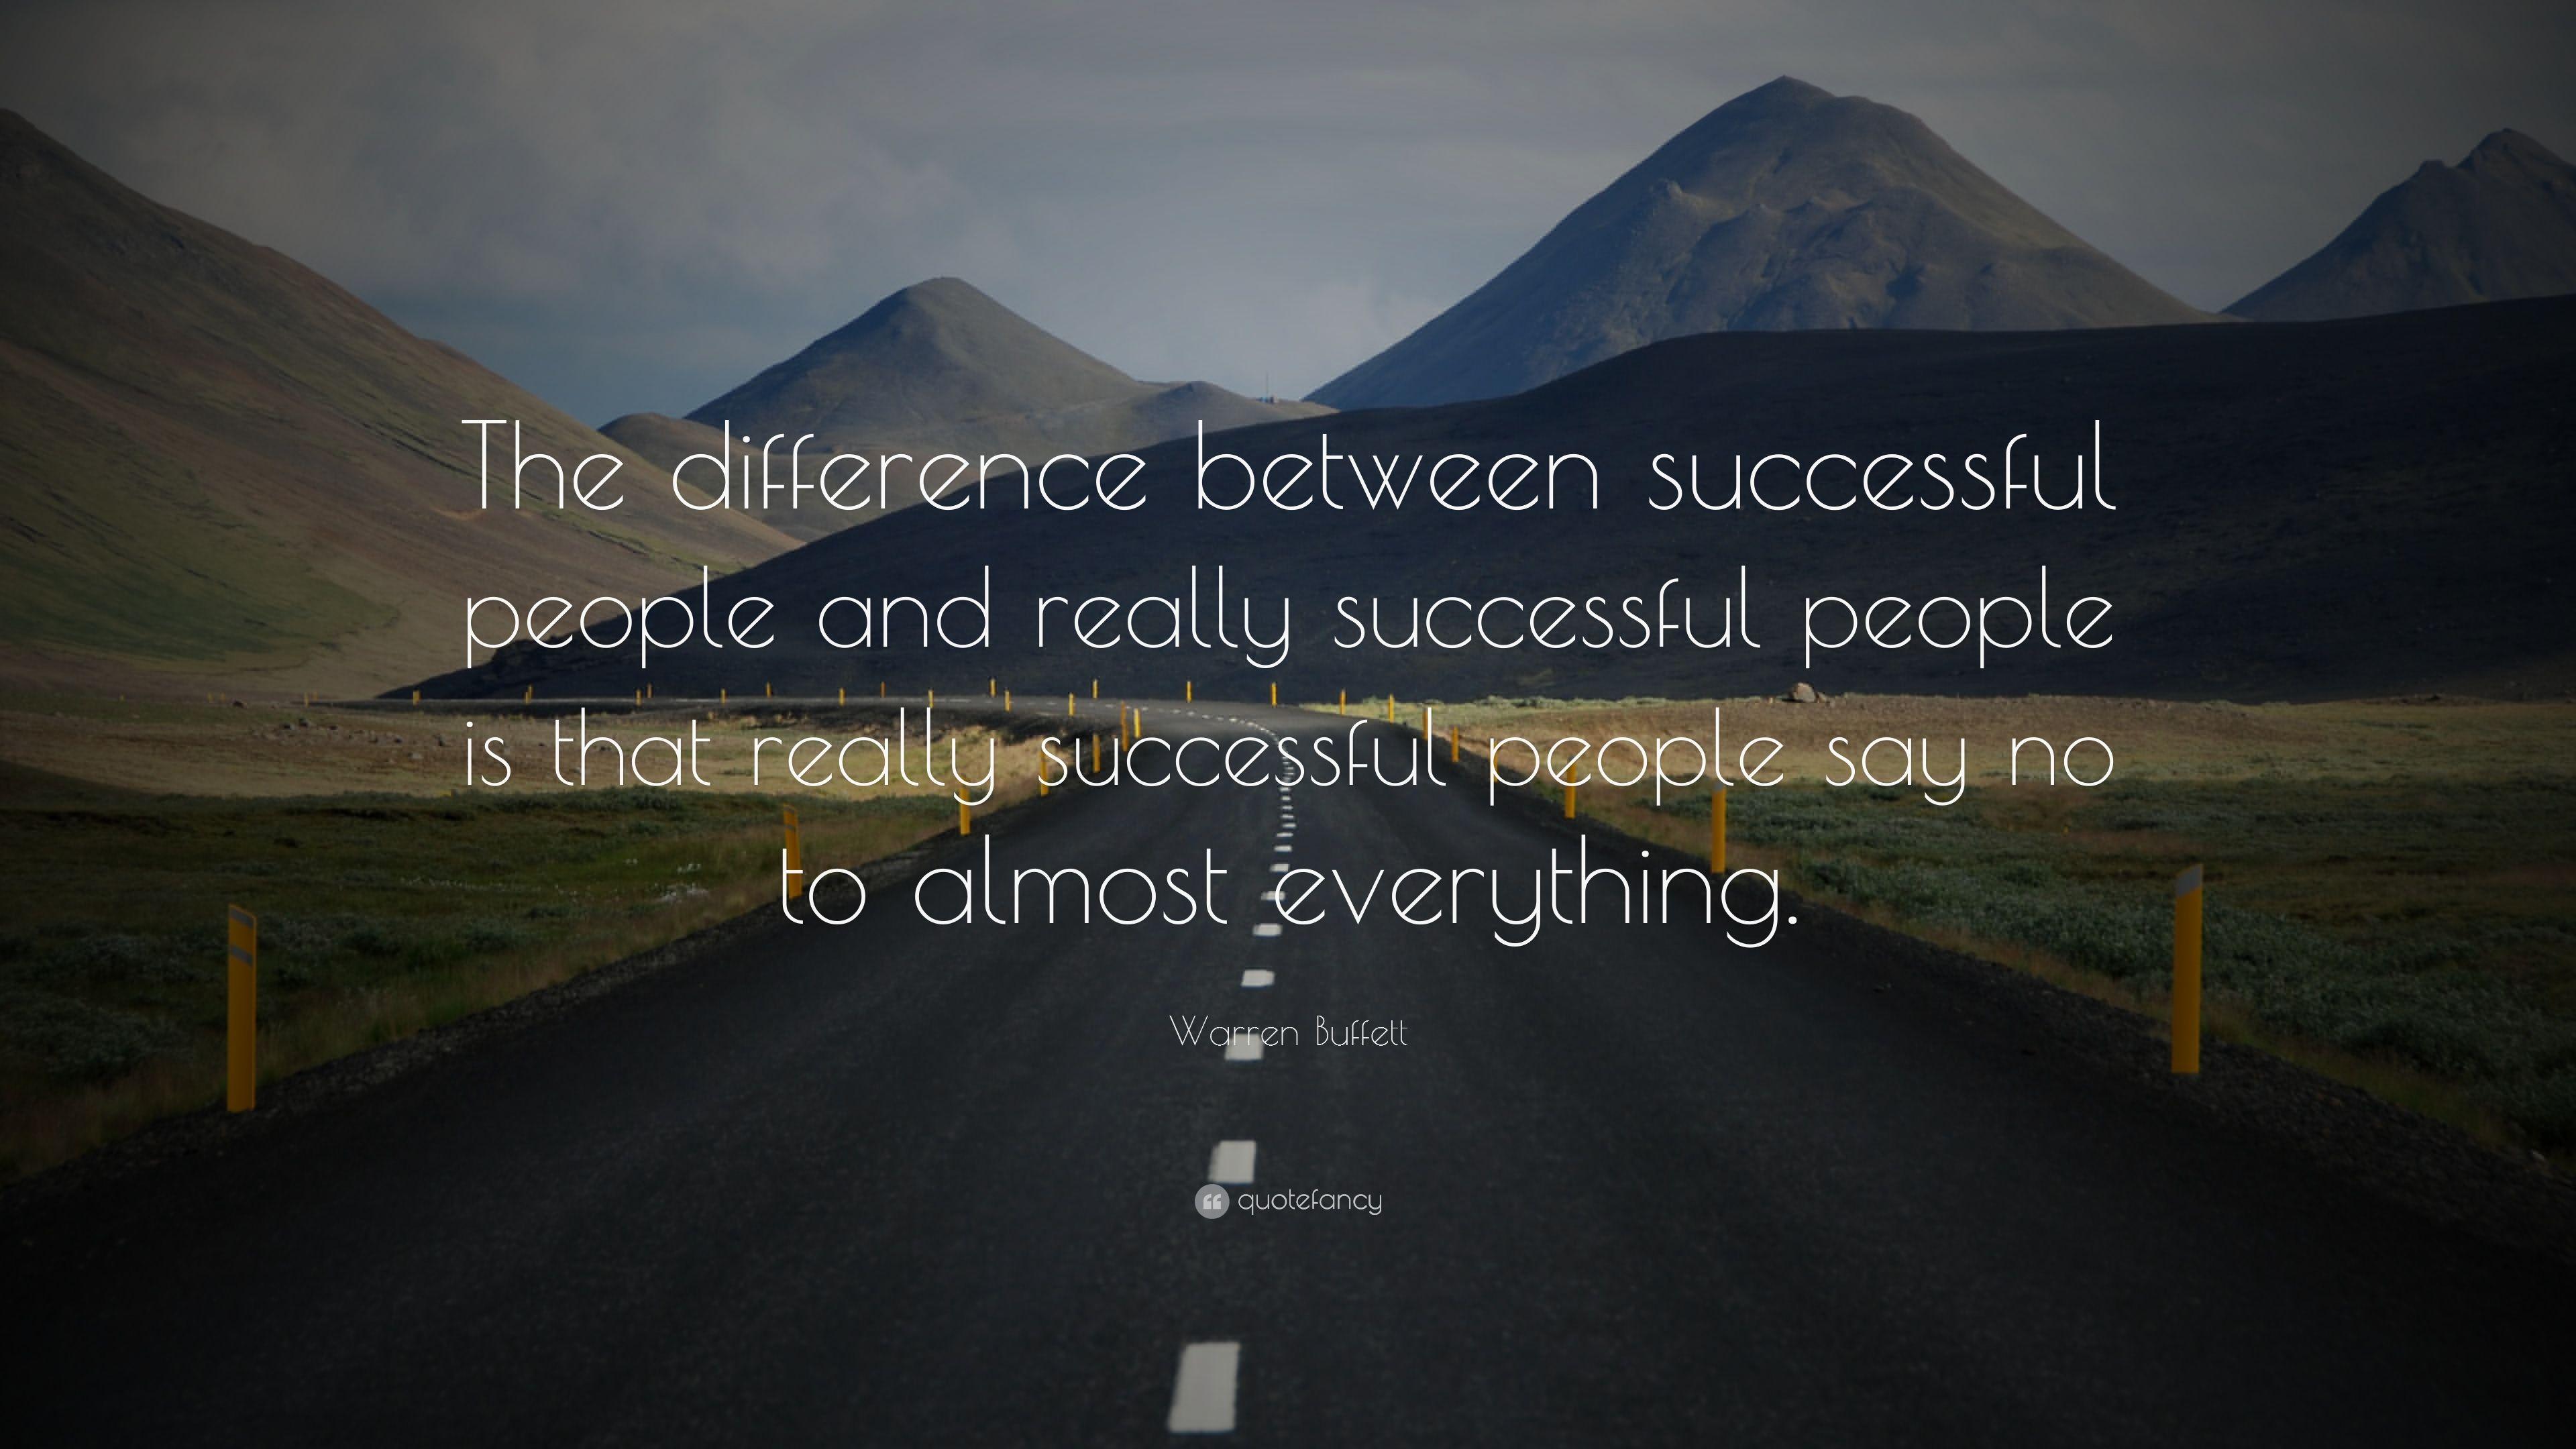 Warren Buffett Quote: “The difference between successful people and really successful people is that really successful people say no to almost .” (22 wallpaper)